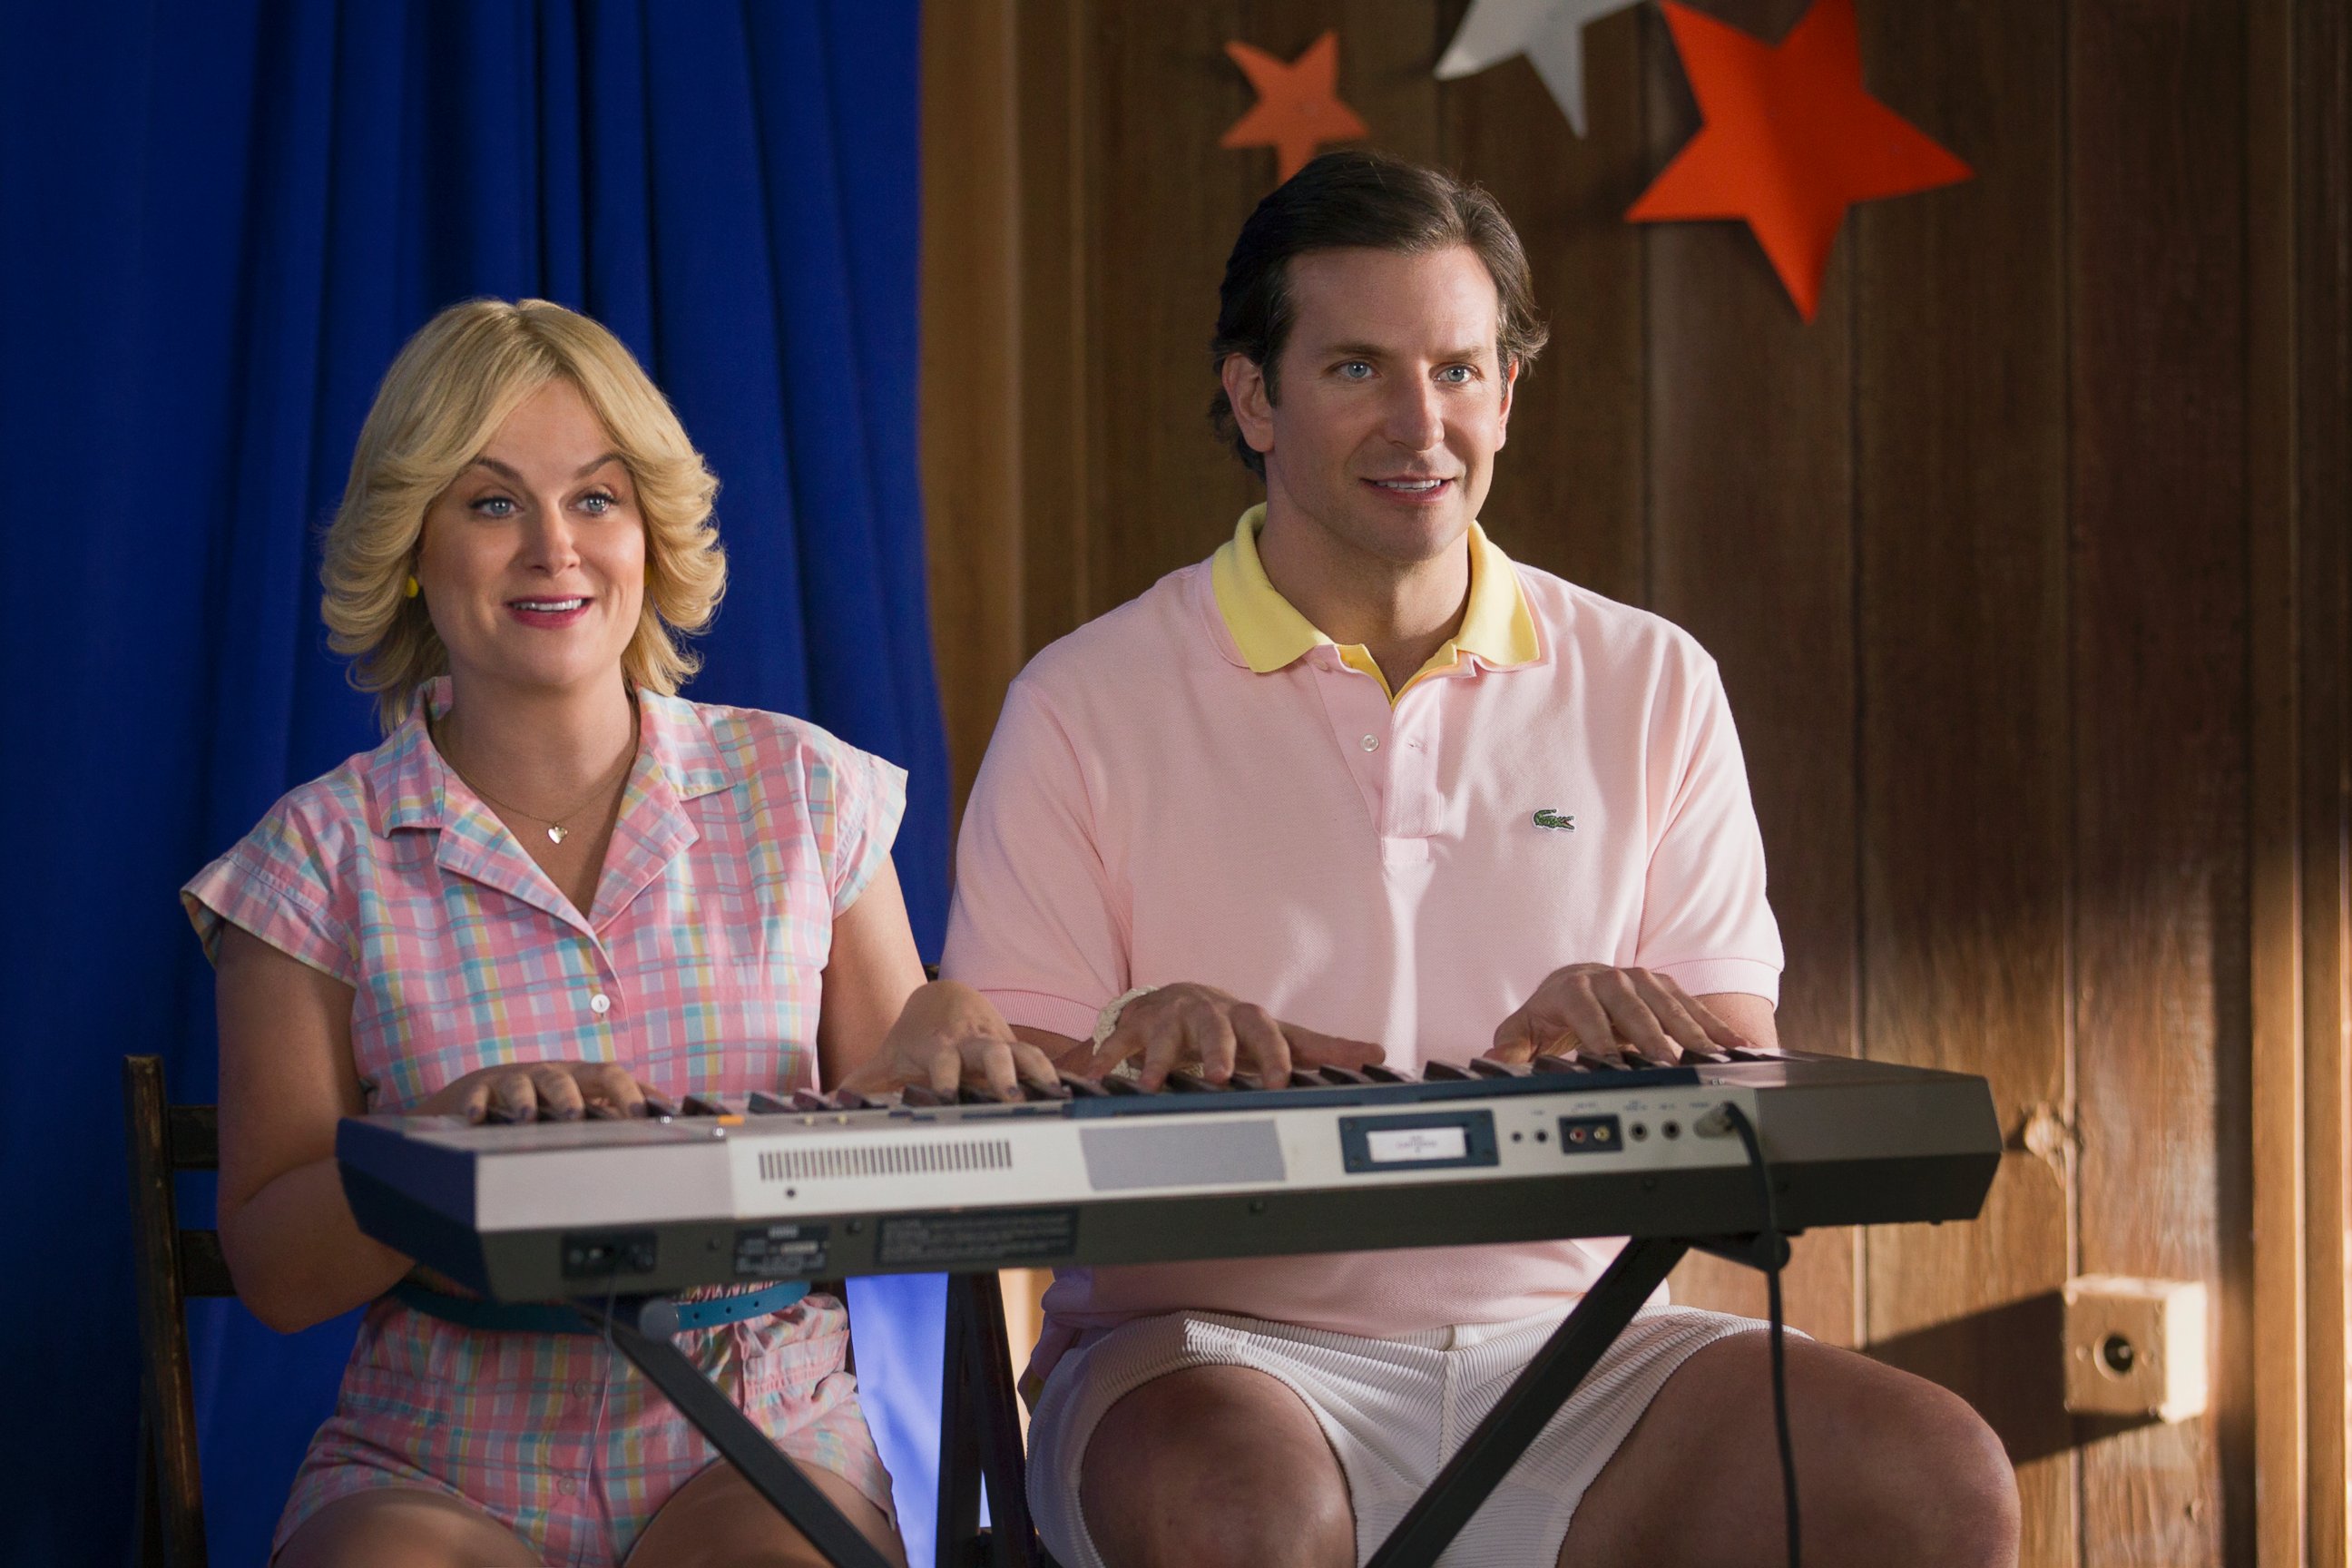 PHOTO: Amy Poehler and Bradley Cooper in the Netflix original series “Wet Hot American Summer: First Day of Camp.”